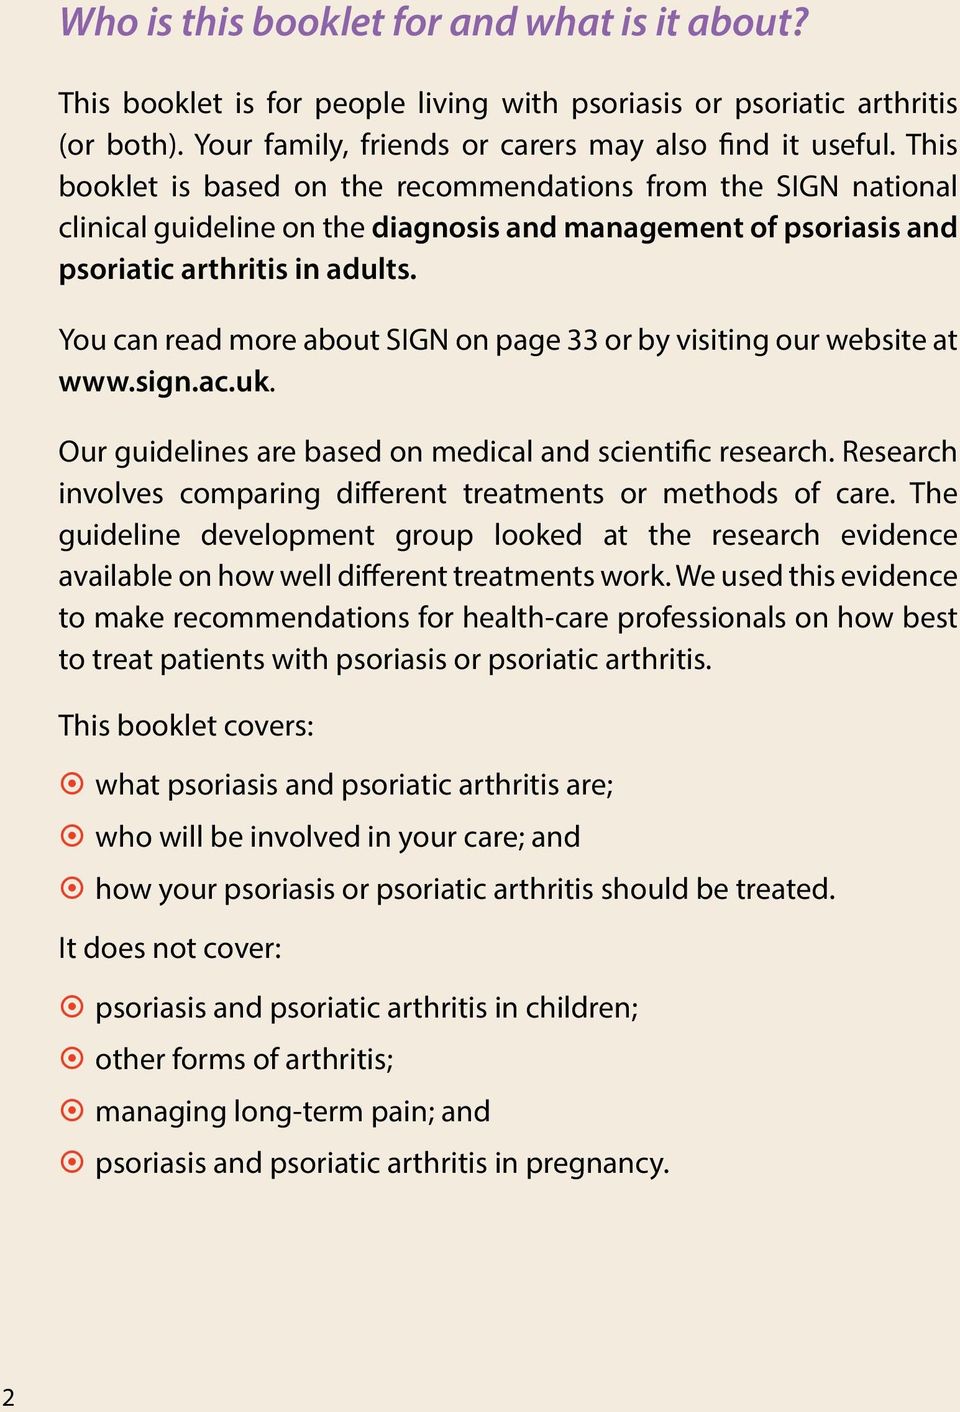 You can read more about SIGN on page 33 or by visiting our website at www.sign.ac.uk. Our guidelines are based on medical and scientific research.